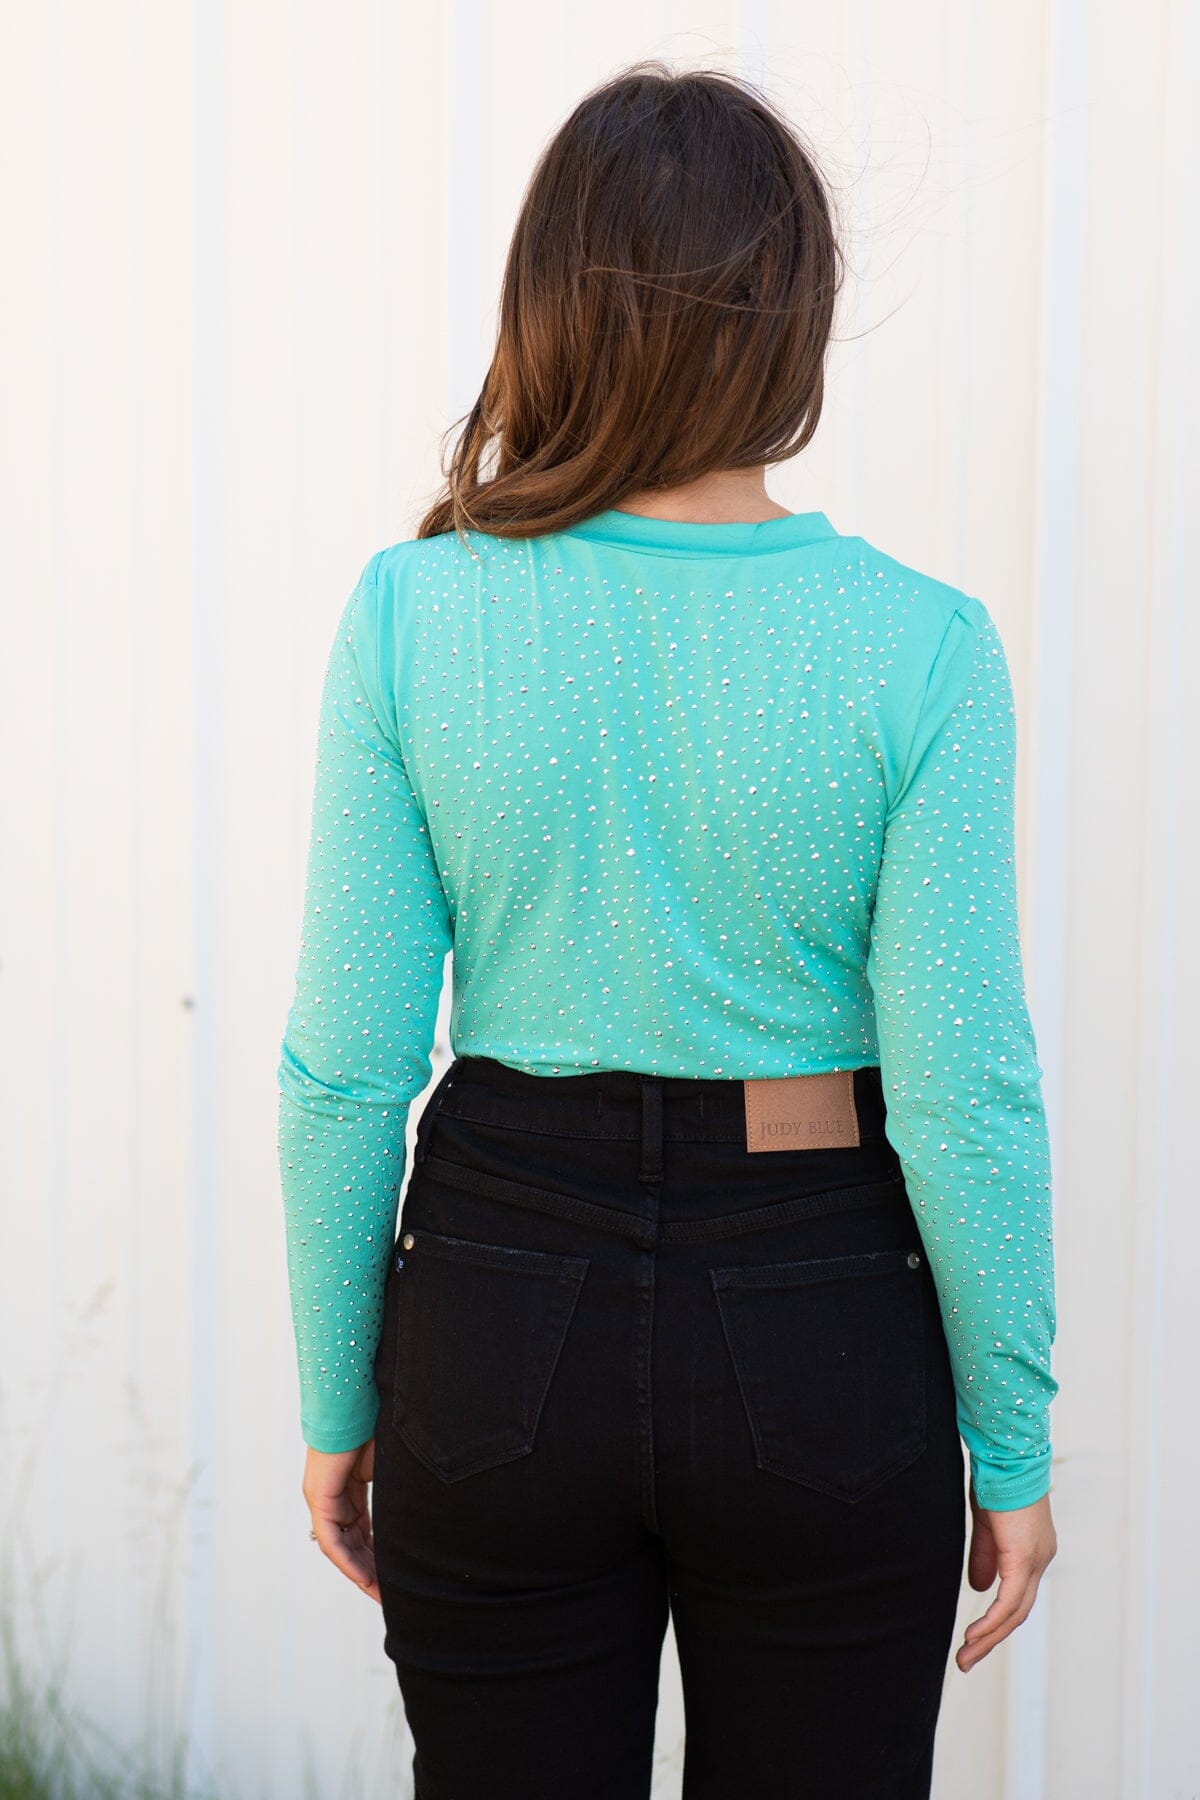 Mint Long Sleeve Bodysuit With Rhinestones - Filly Flair